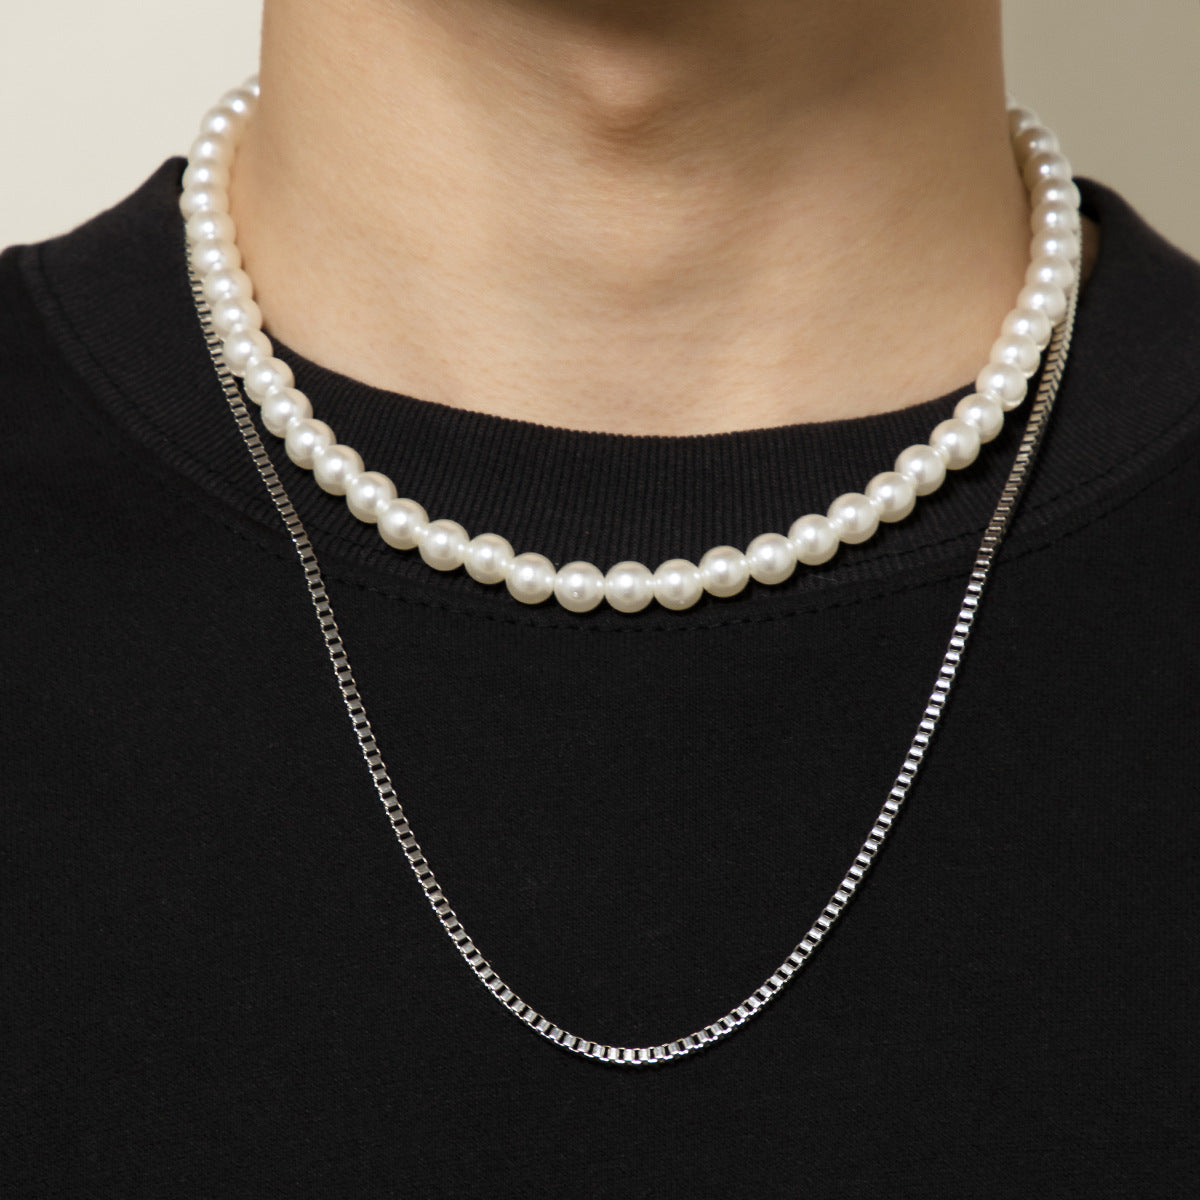 Get Trendy with our 2pcs/Set Hip Hop Geometric Box Chain Stacked Pearl Necklace Set